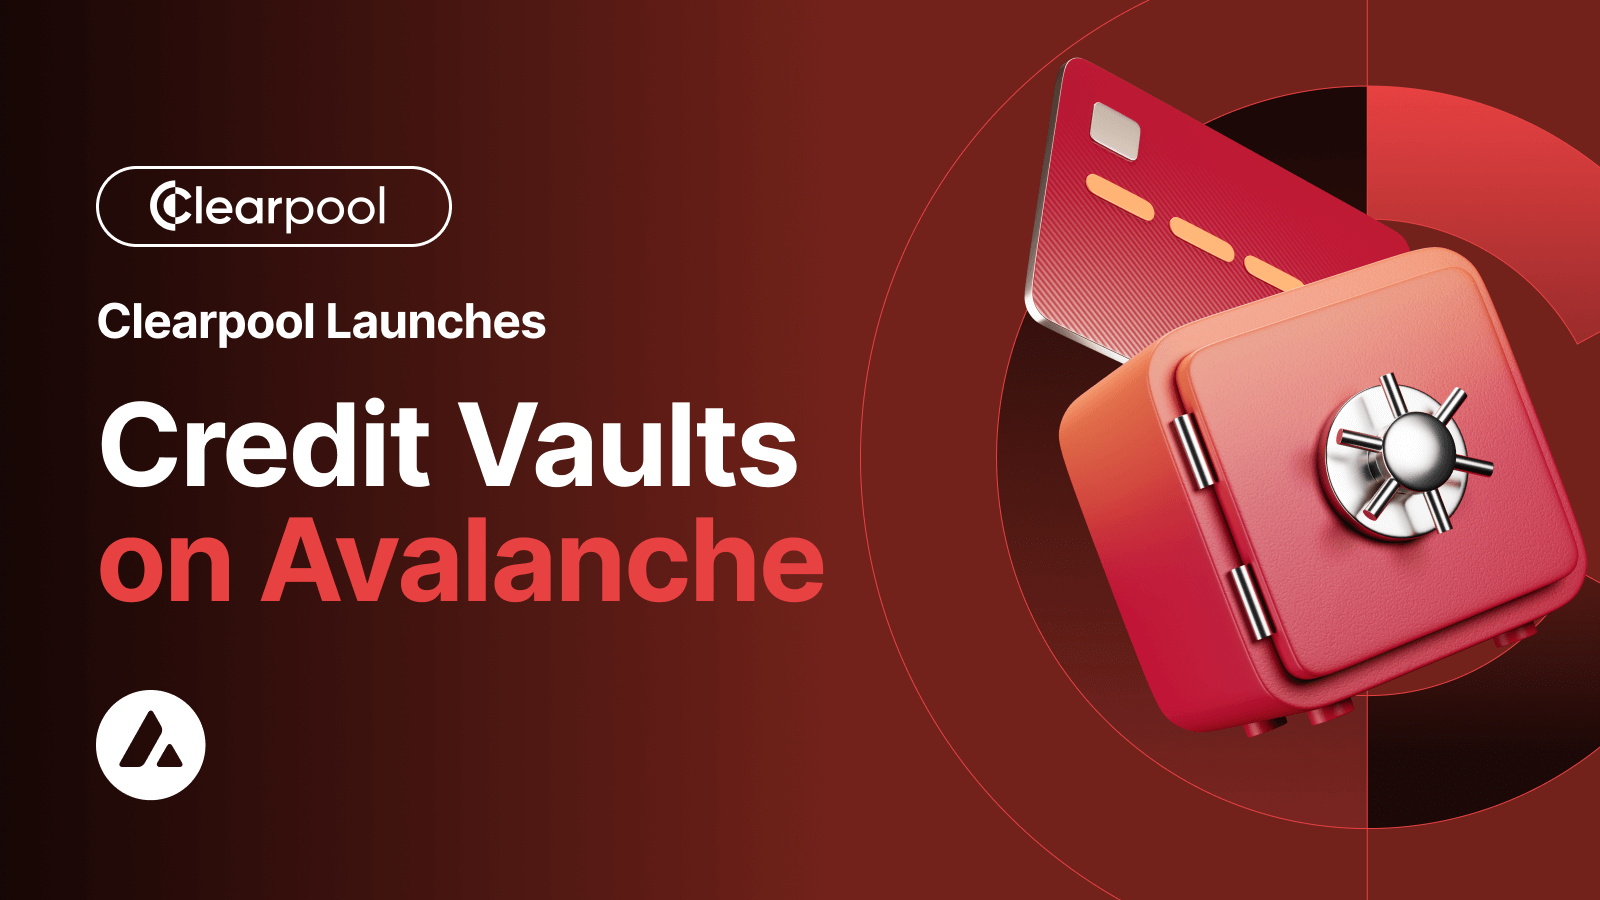 Credit Vaults on Avalanche